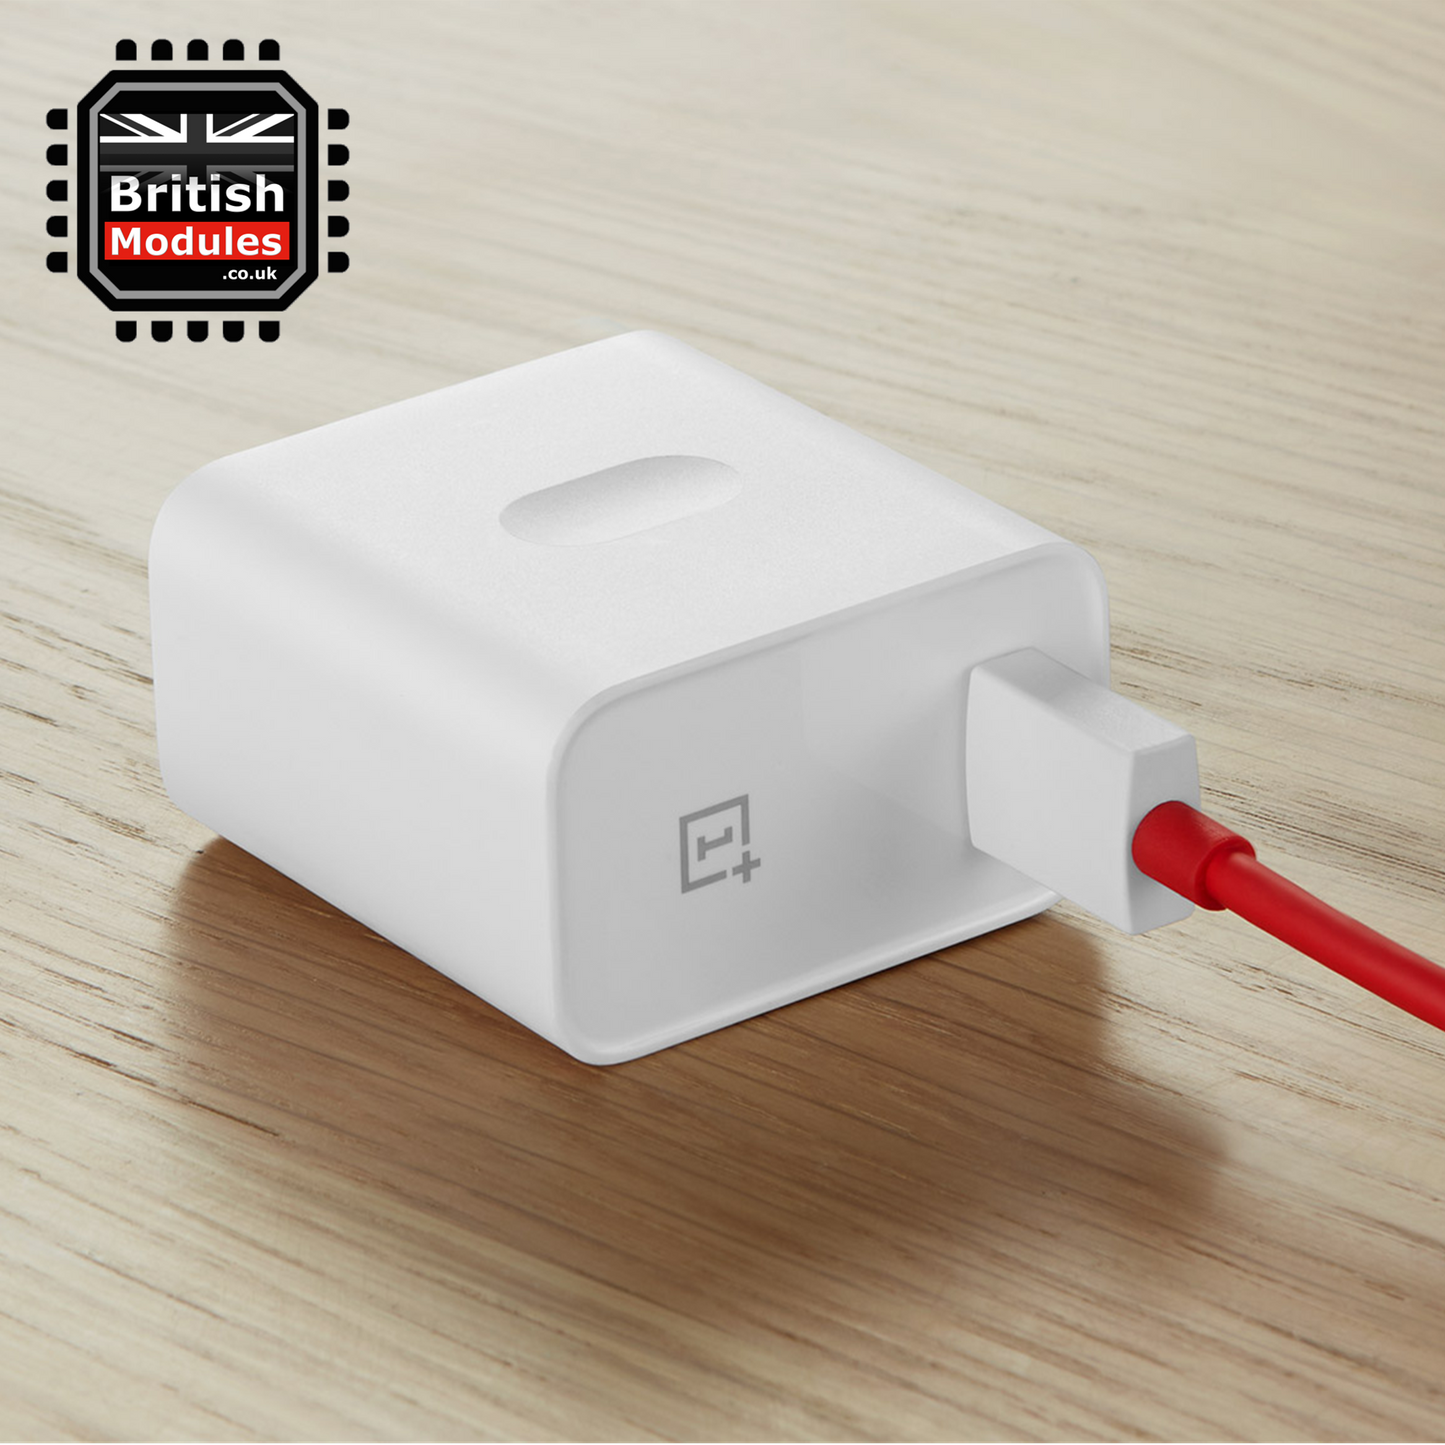 OnePlus SUPERVOOC / Warp Charge 30W Type-A Power Adapter USB-A Charger EU Plug